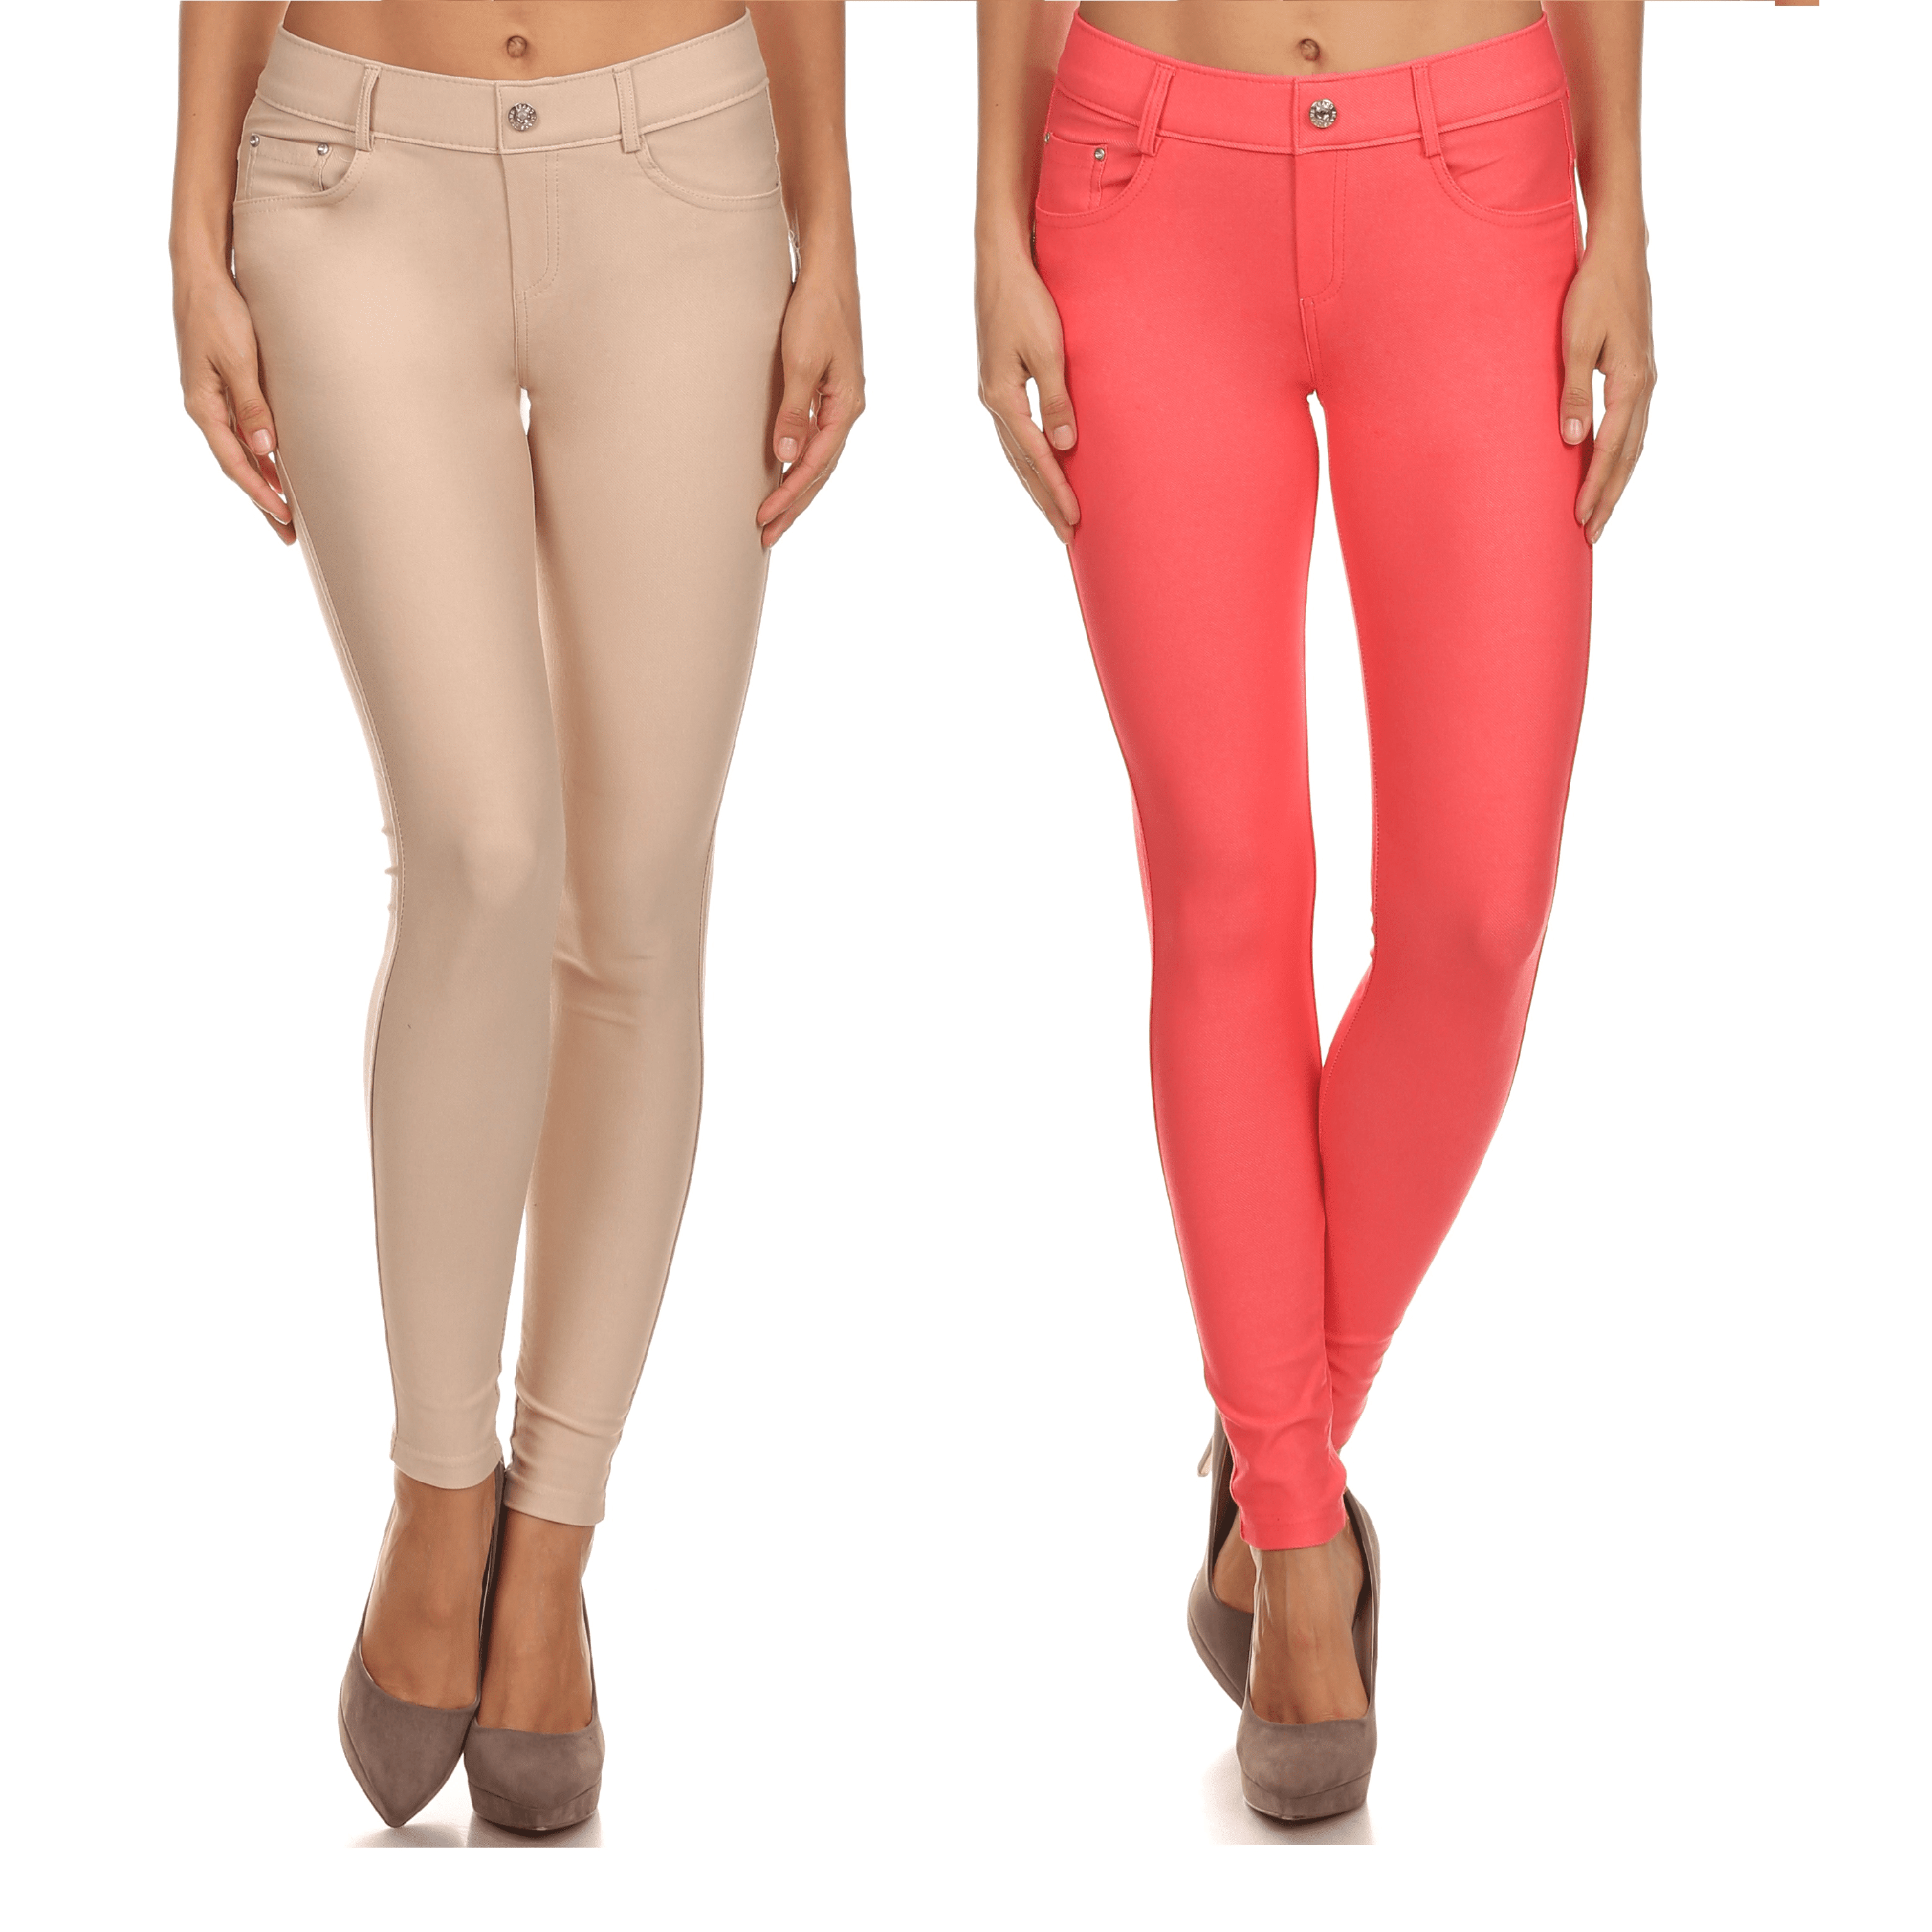 Simlu Long Jeggings For Women Skinny Stretch Fitted Pull On Jeggings Pants Pockets Walmart 